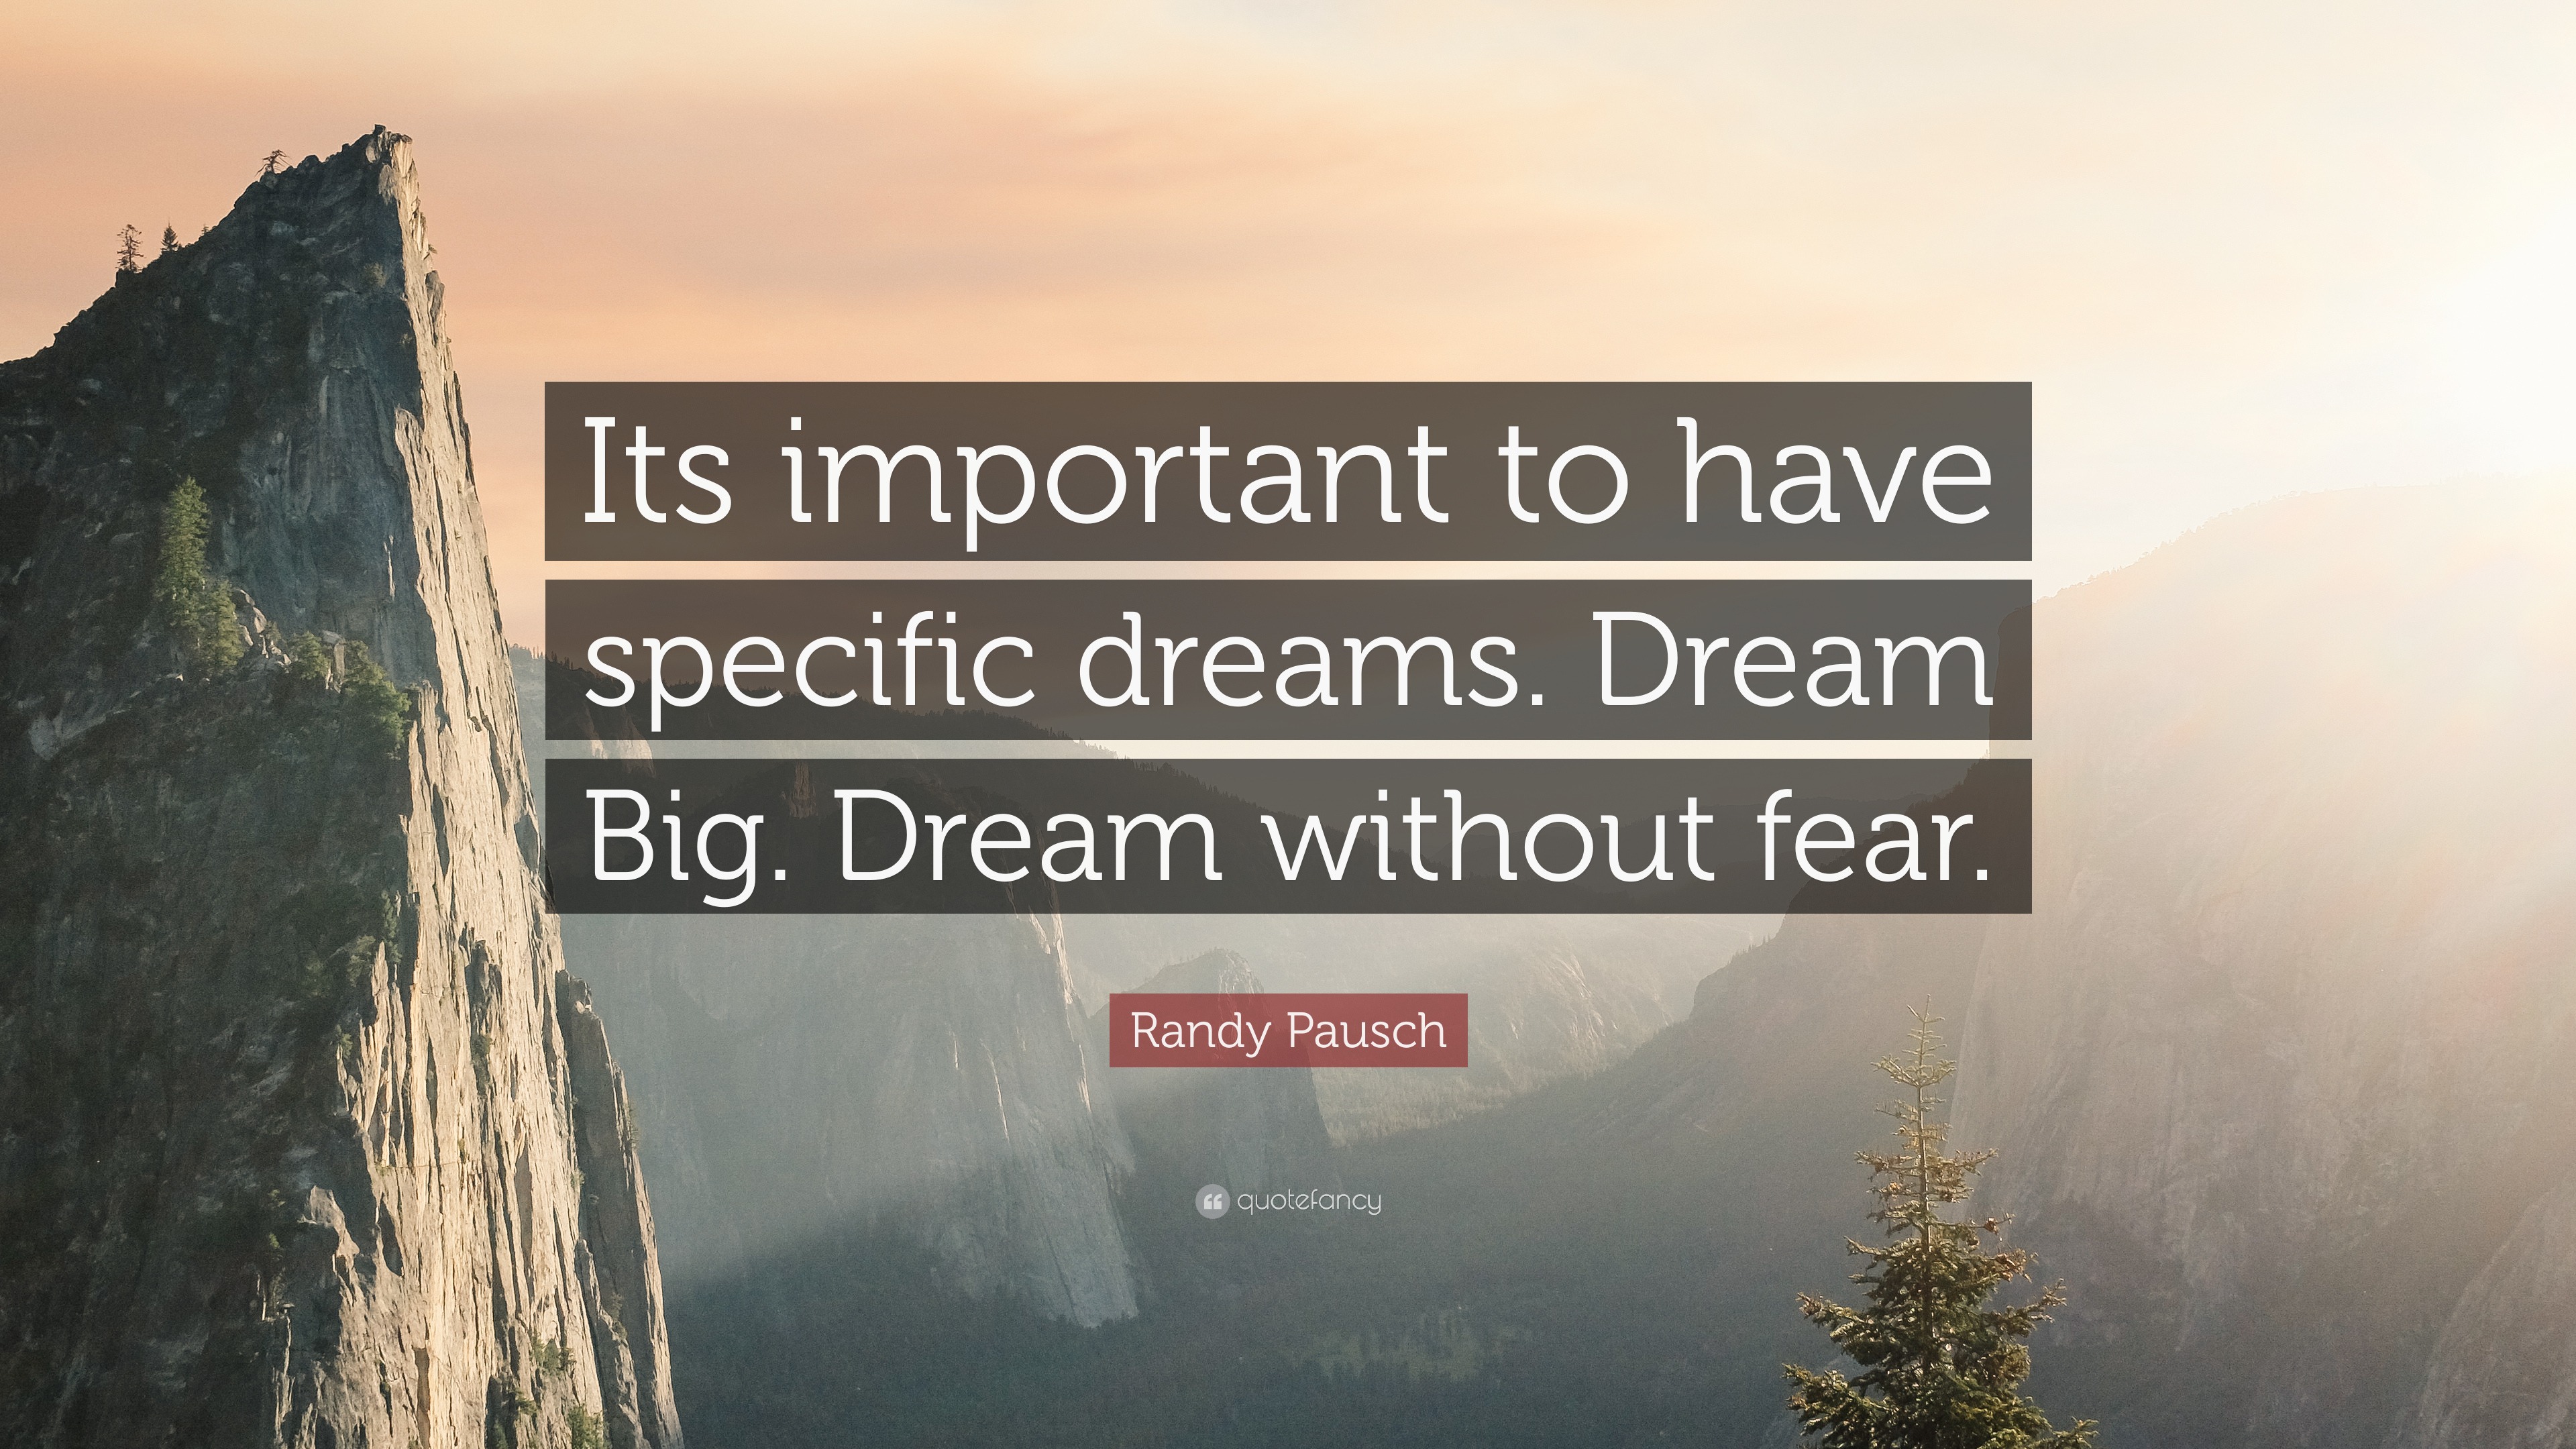 Randy Pausch Quote: “Its important to have specific dreams. Dream Big